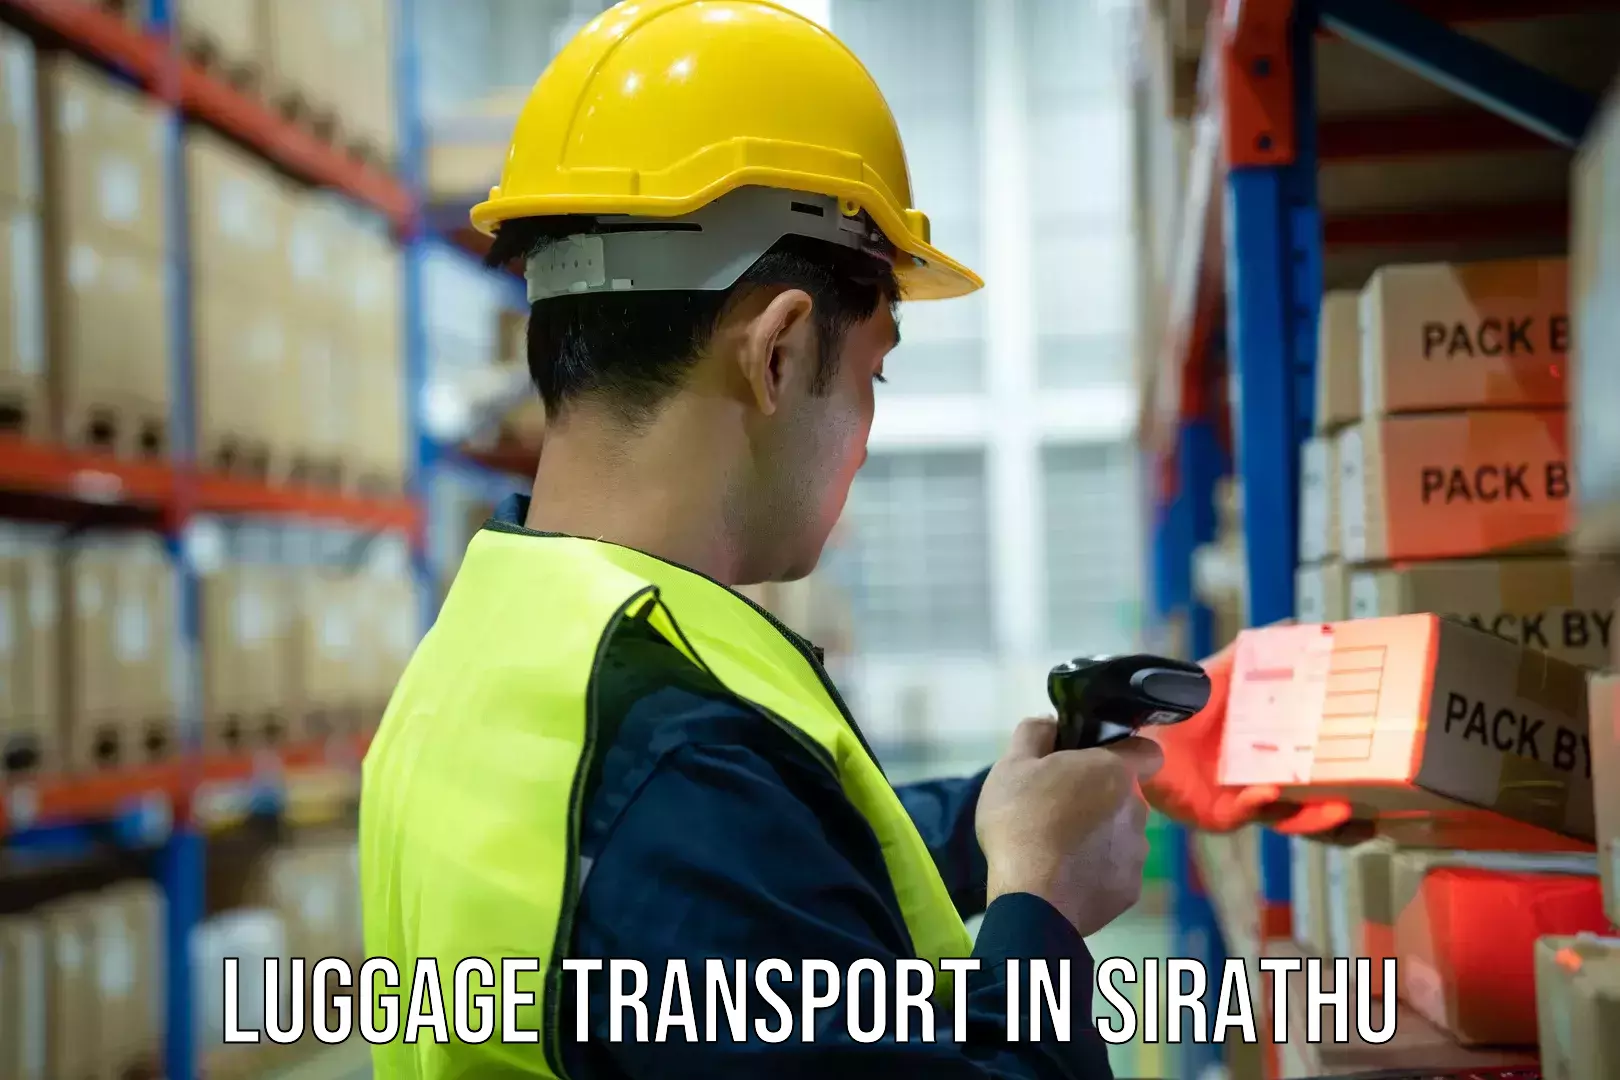 Luggage shipping trends in Sirathu